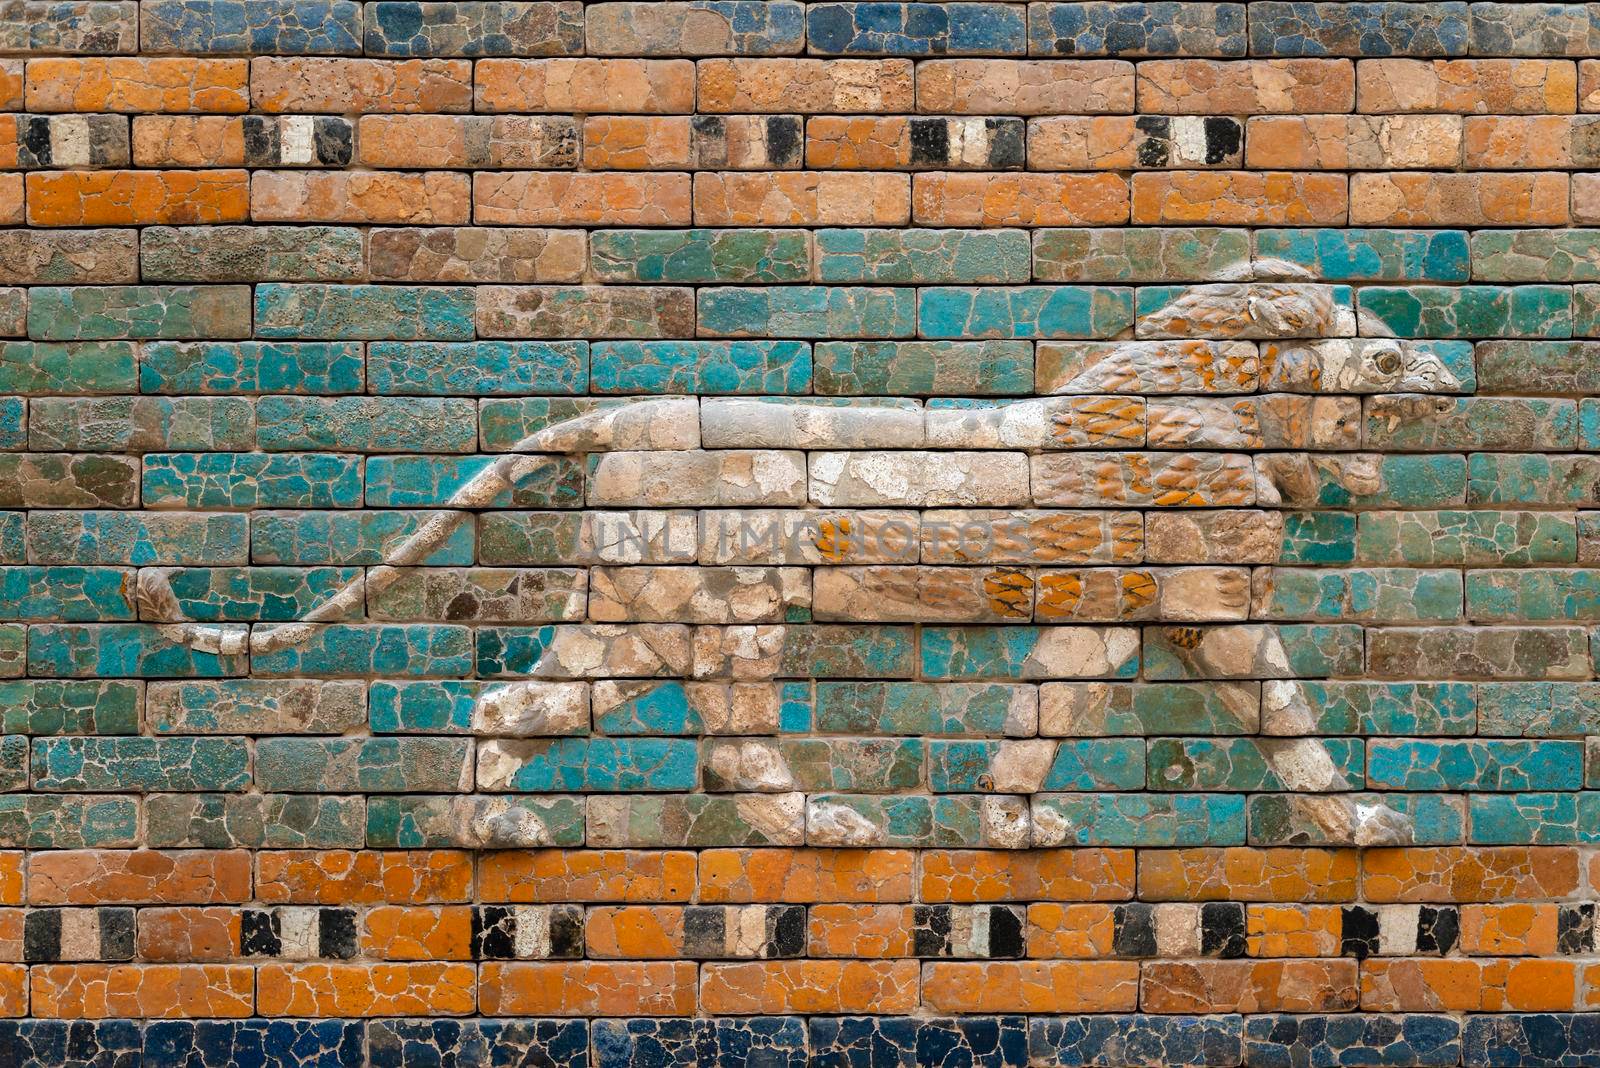 walking lion relief on glazed ceramic wall from ancient Babylon
